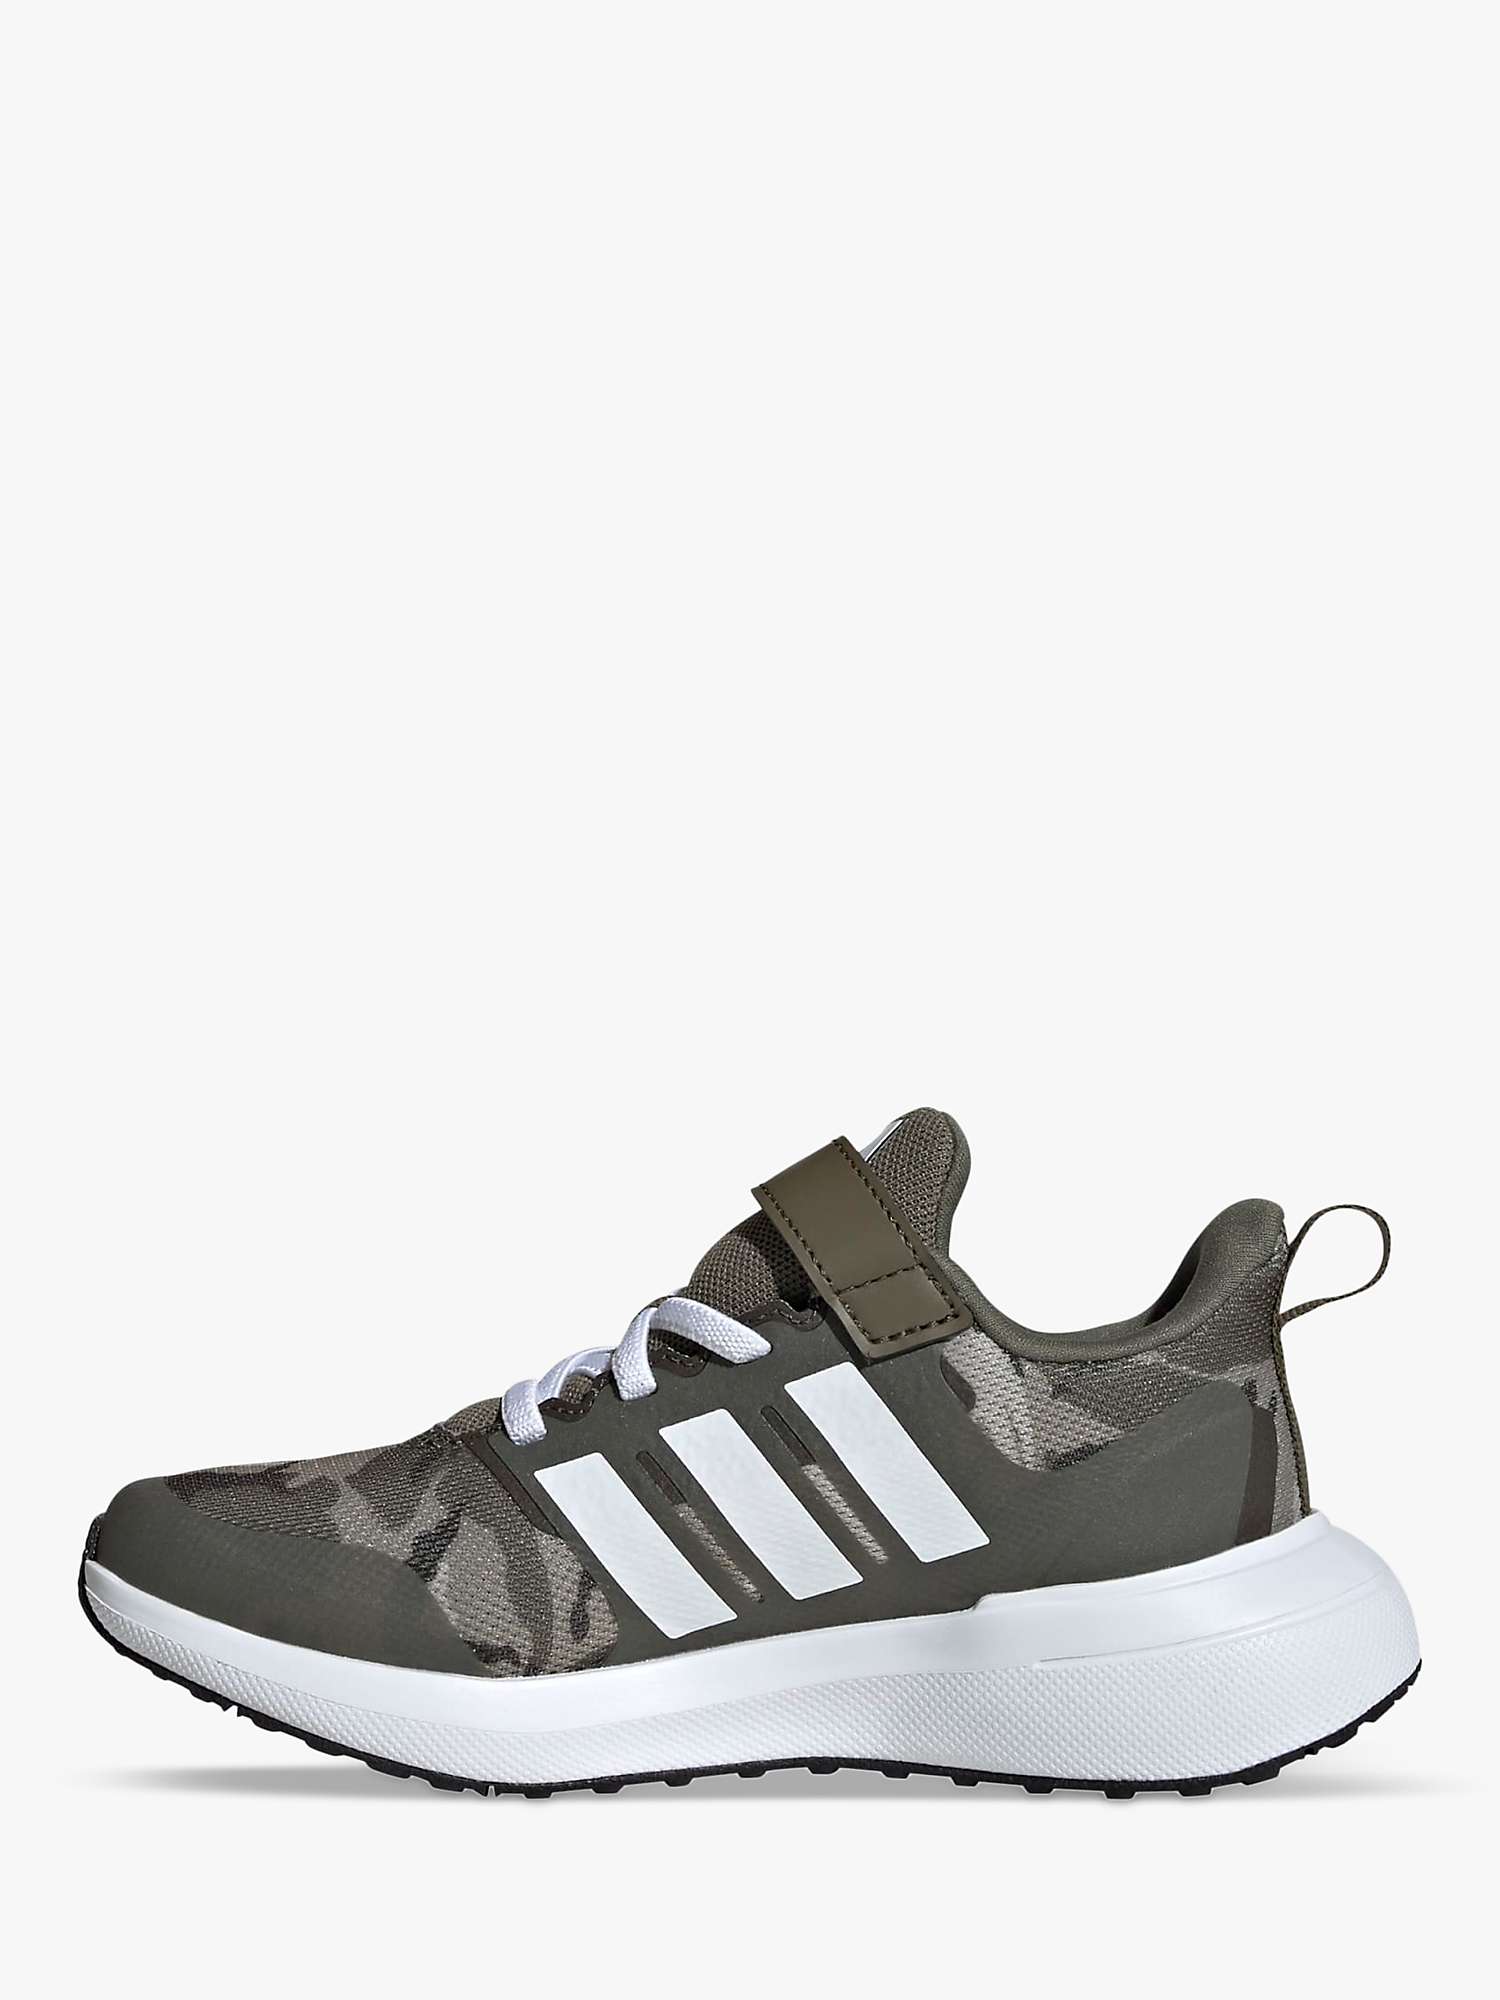 Buy adidas Kids' Forta Run 2.0 Trainers, Olive Online at johnlewis.com